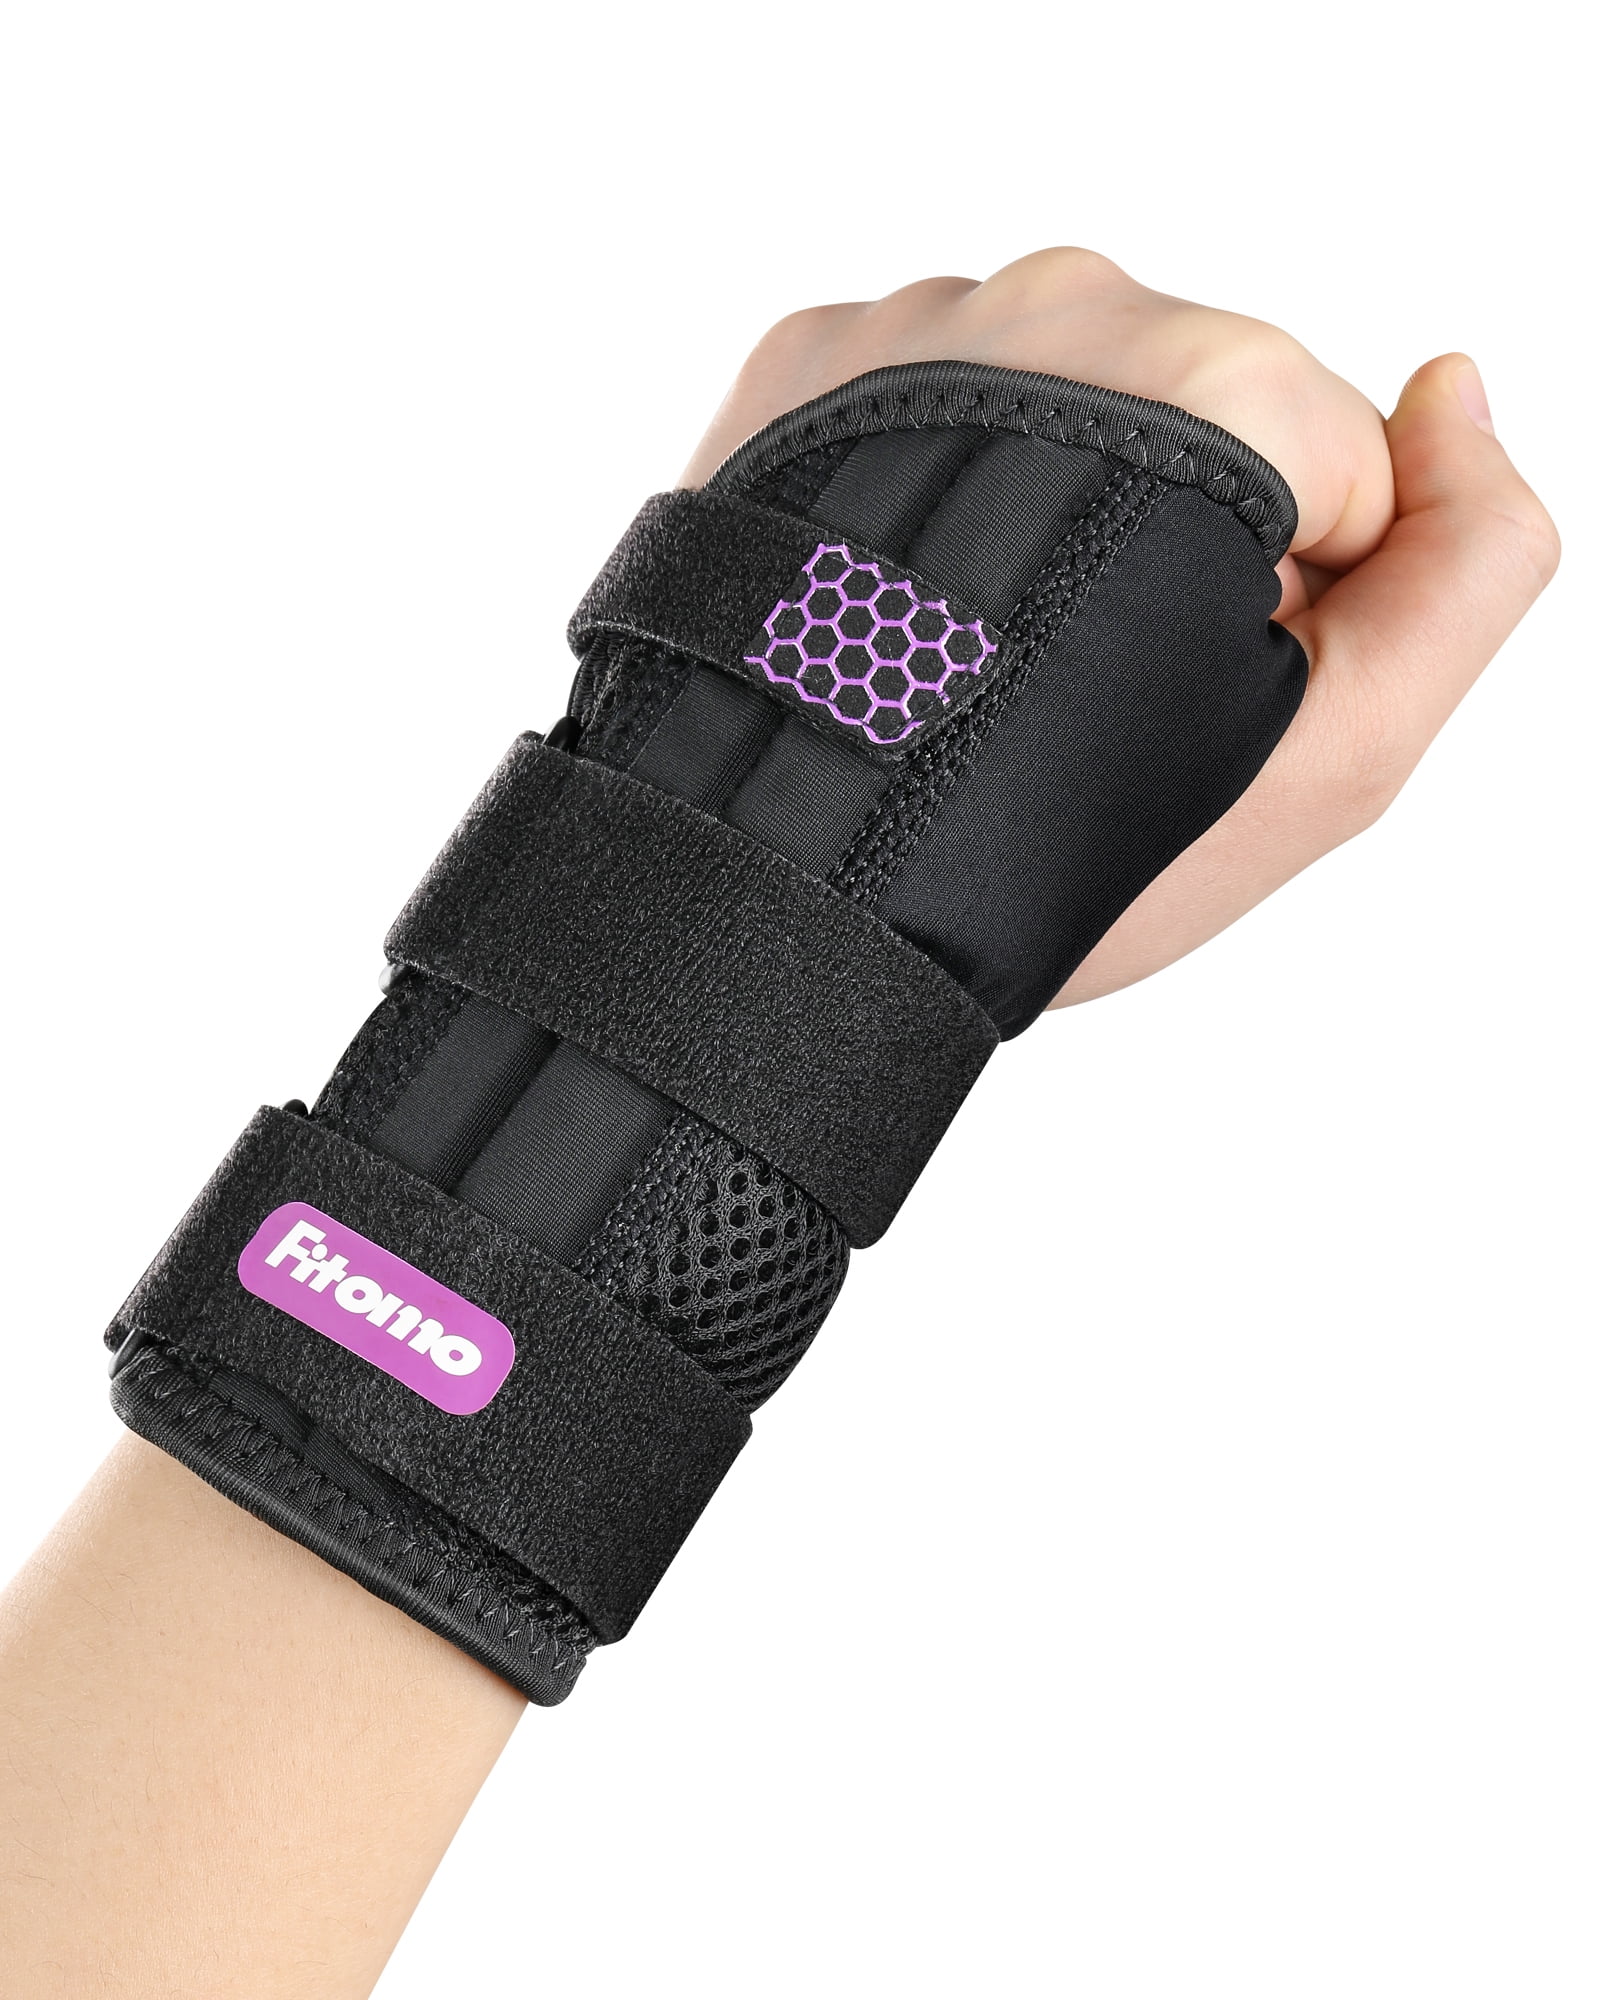 Featol Adjustable Wrist Support Brace with Splints, Right  Hand,Small/Medium,for Carpal Tunnel,Injuries,Wrist Pain, Sprain